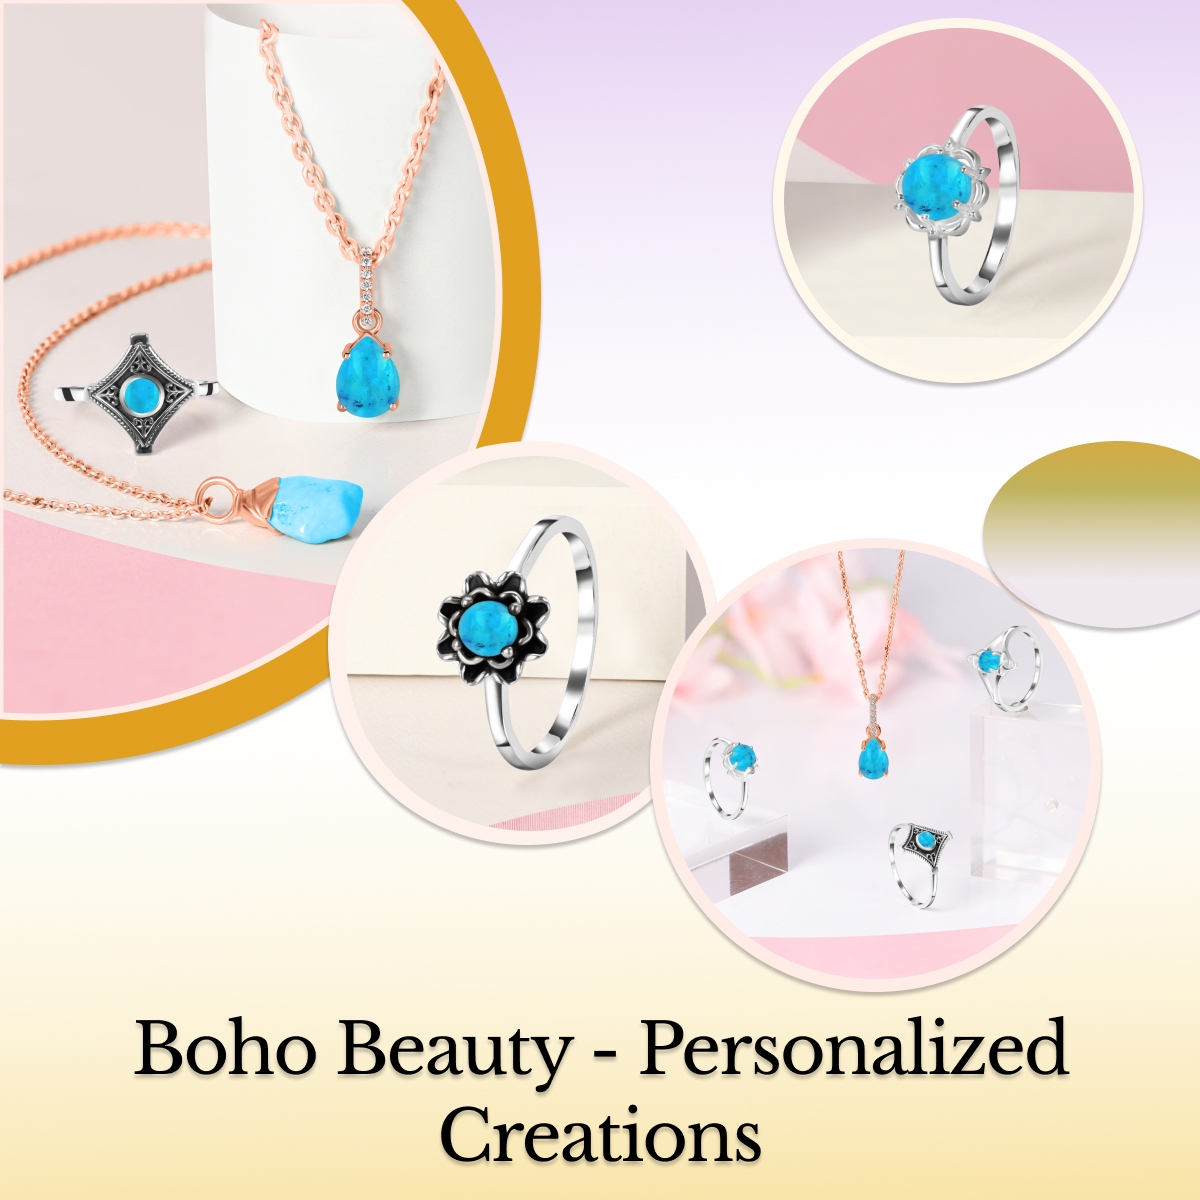 What Is Boho Jewelry & How to Customize It?